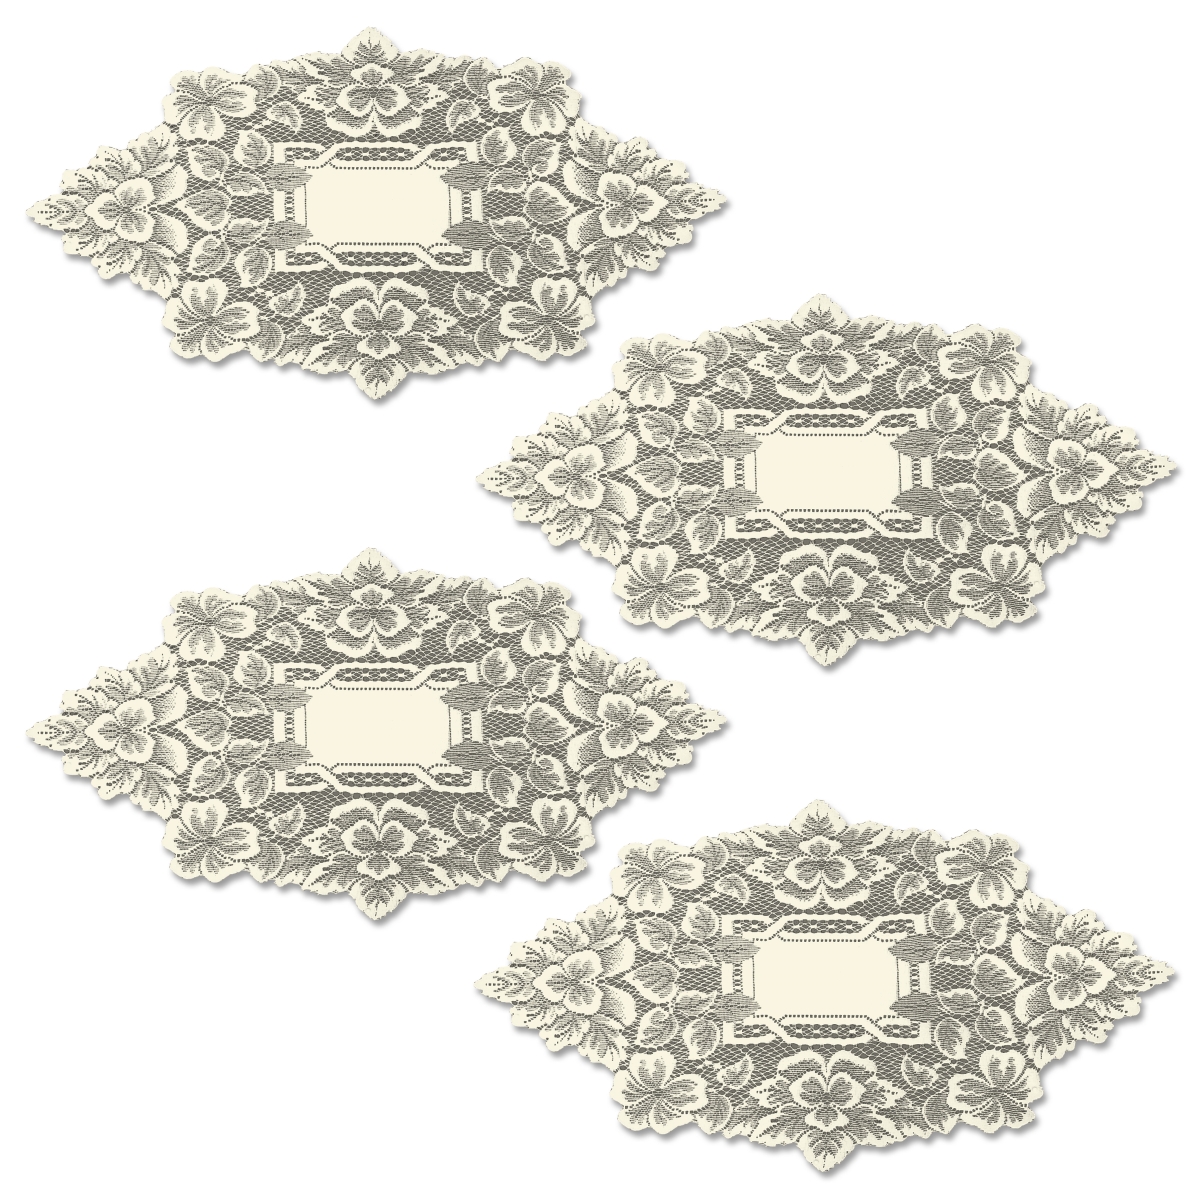 Picture of Heritage Lace HL-1220E-S 12 x 20 in. Heirloom Doily - Ecru - Set of 4